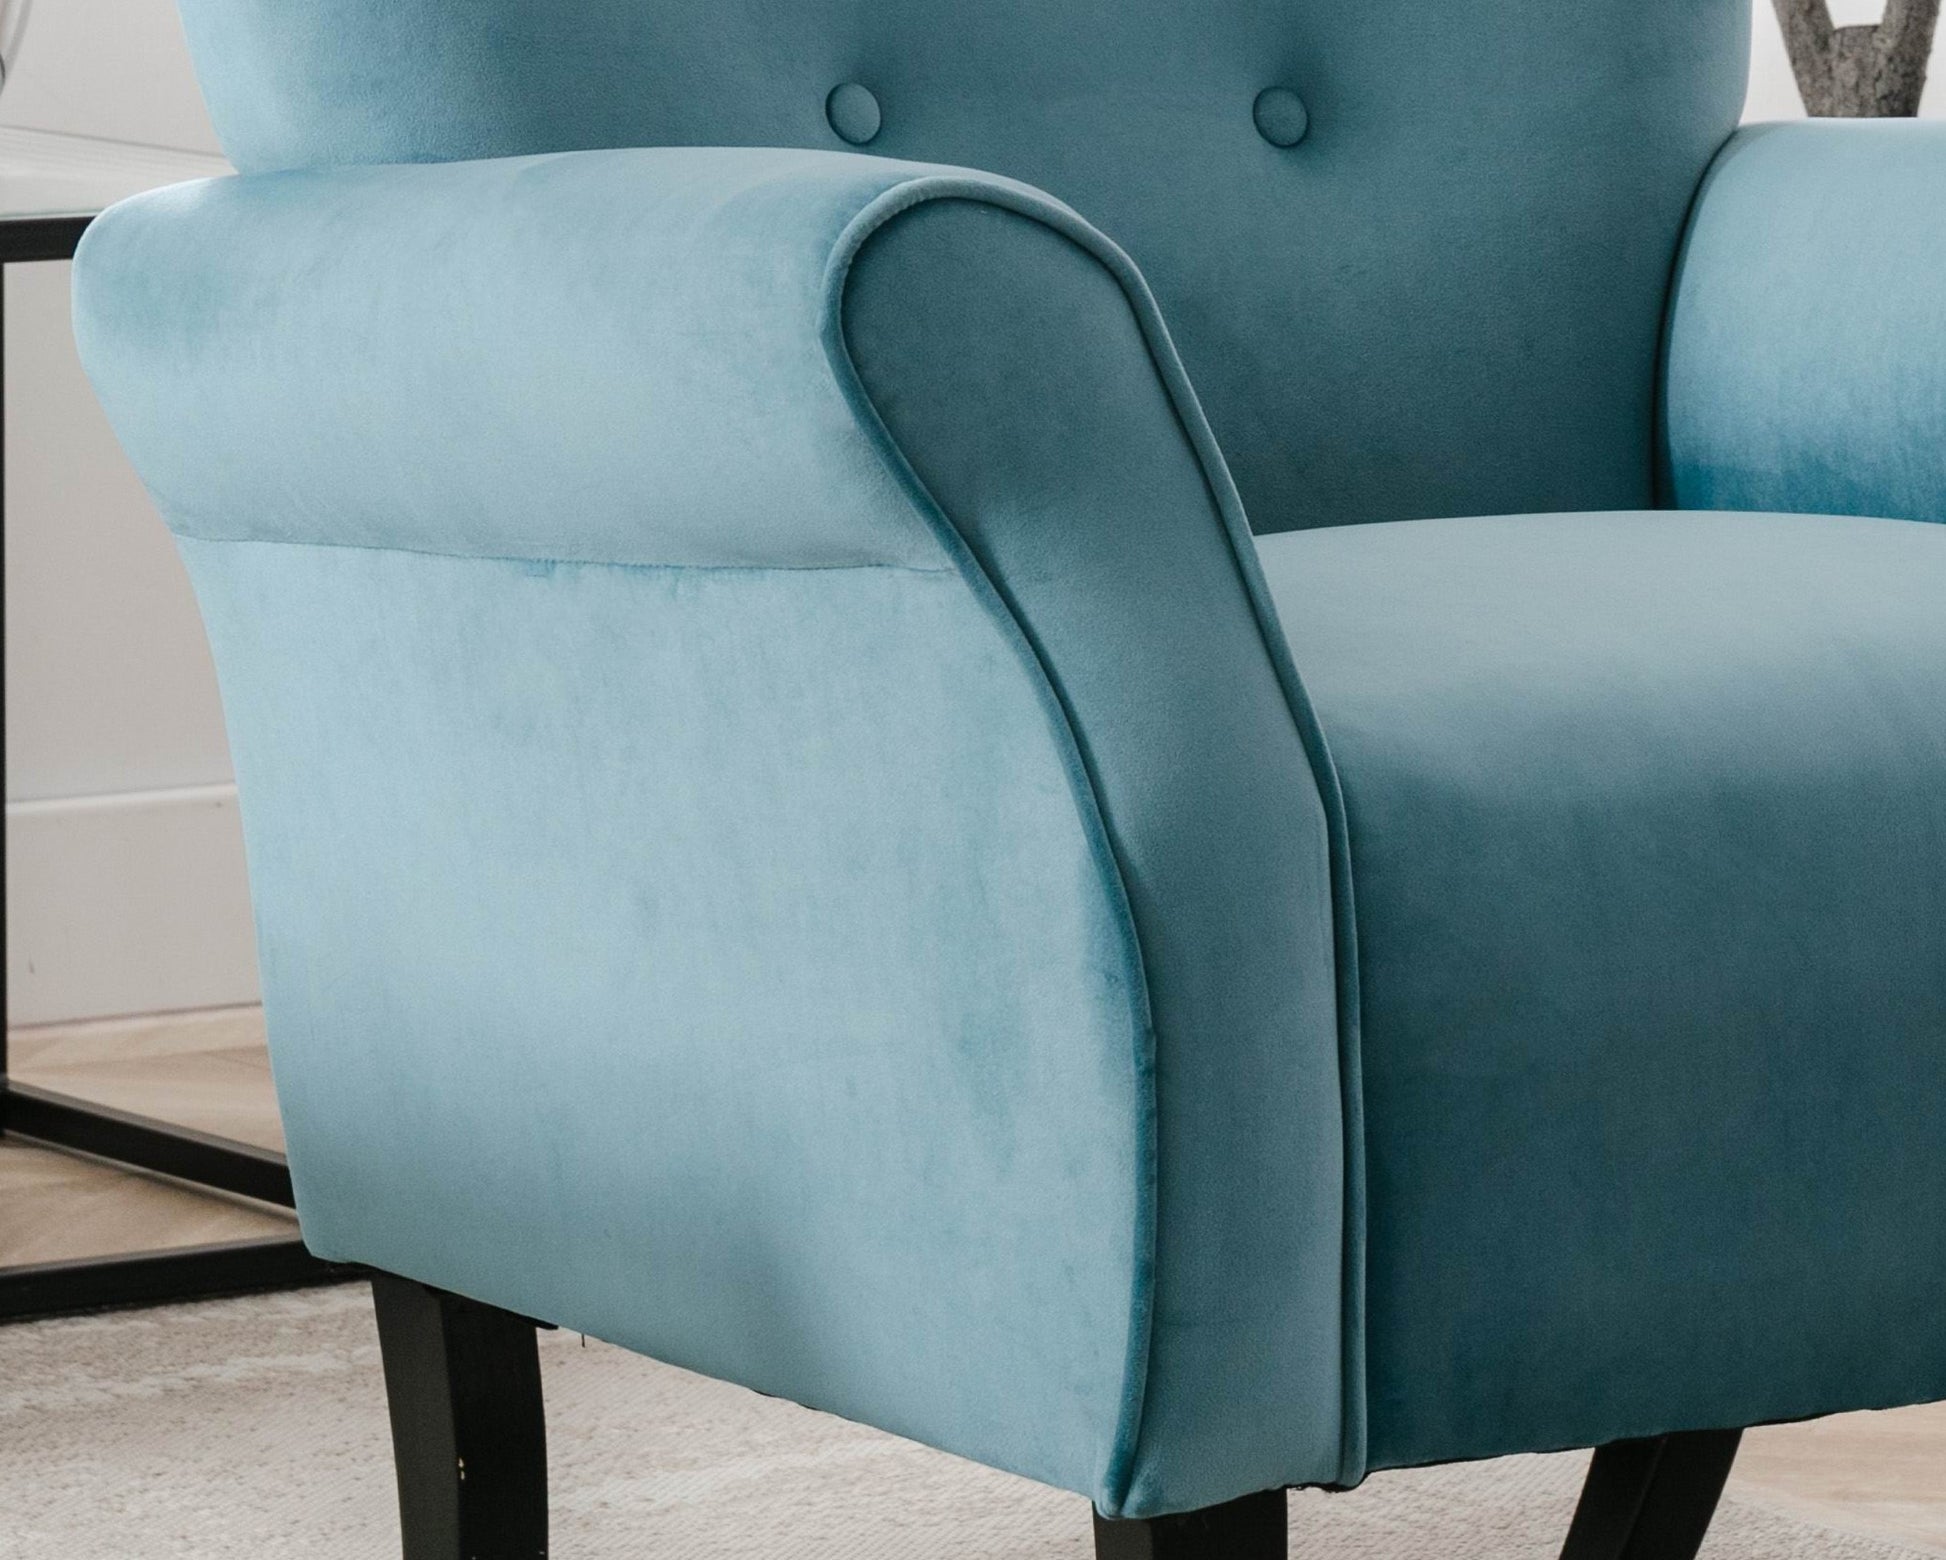 Stylish Living Room Furniture 1pc Accent Chair Blue blue-primary living space-luxury-modern-solid